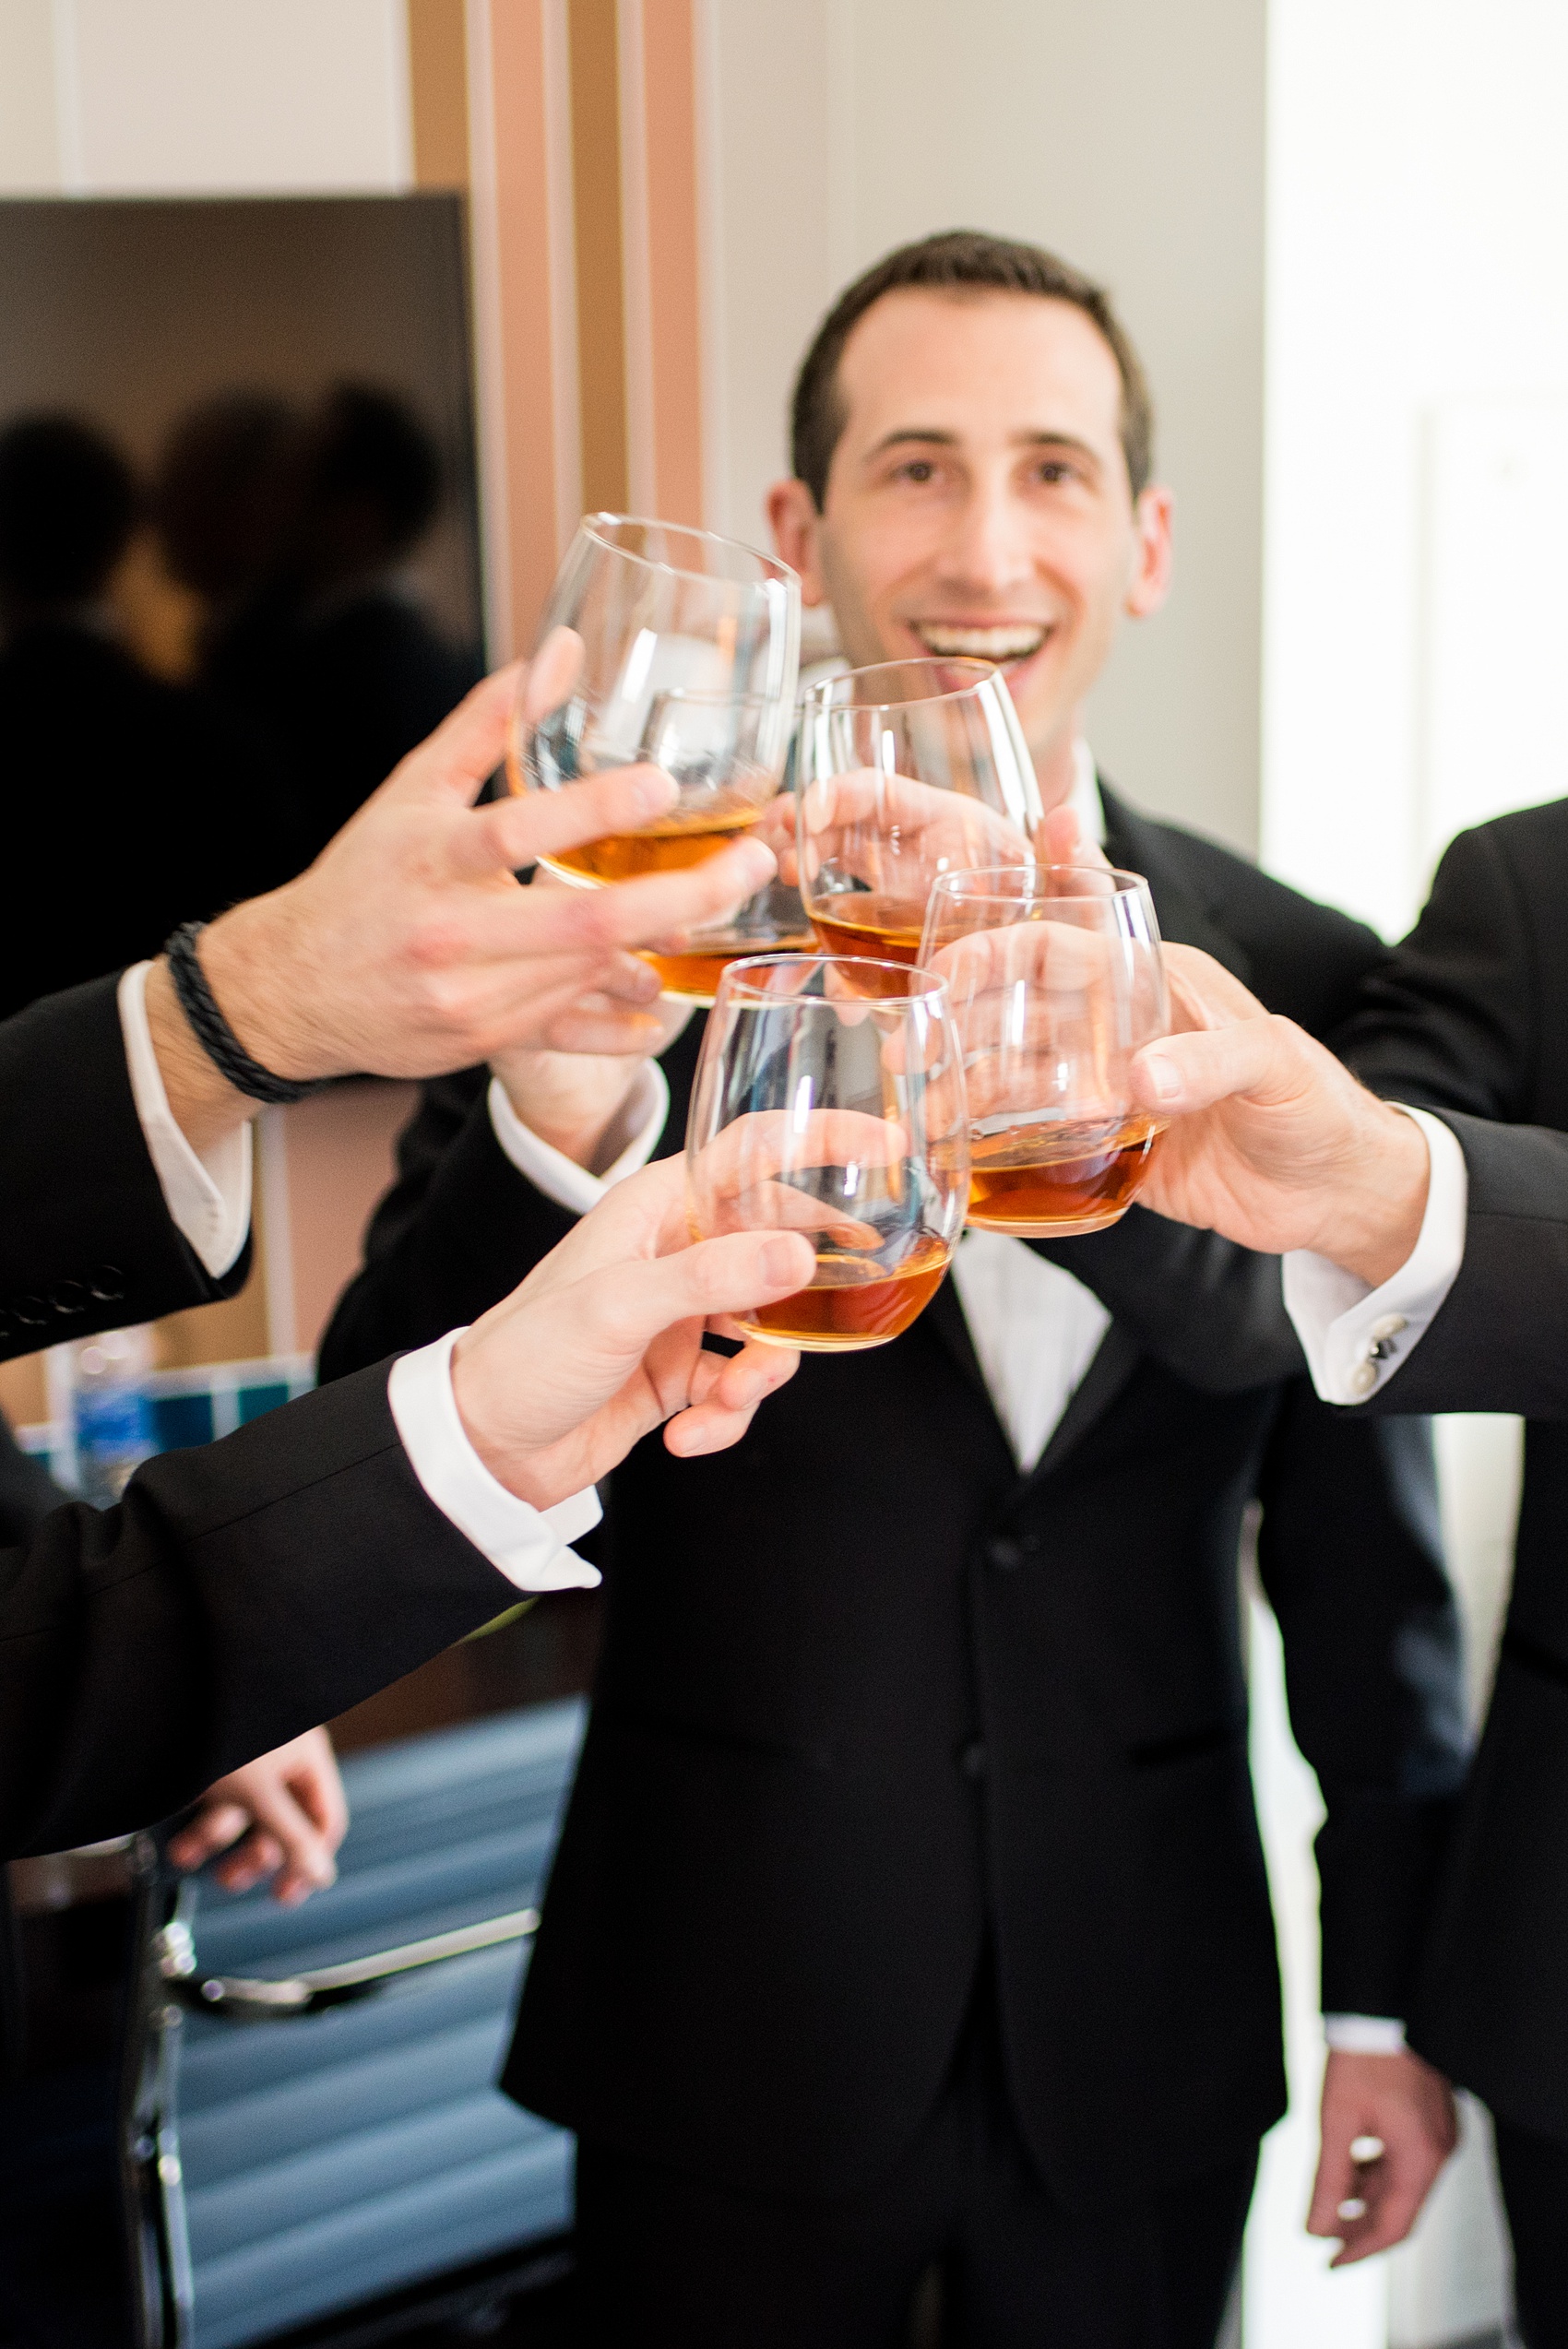 W Hoboken wedding photos by Mikkel Paige Photography. Pictures in this well known New Jersey venue with a view of the Manhattan skyline. Image of the groom and his groomsmen during the start of the afternoon, getting ready at the colorful teal Starwood hotel drinking whiskey. #mikkelpaige #HobokenWedding #NewJerseyPhotographer #NewYorkCityPhotographer #NYCweddingphotographer #brideandgroomphotos #redpeonies #romanticwedding #springwedding #CityWedding